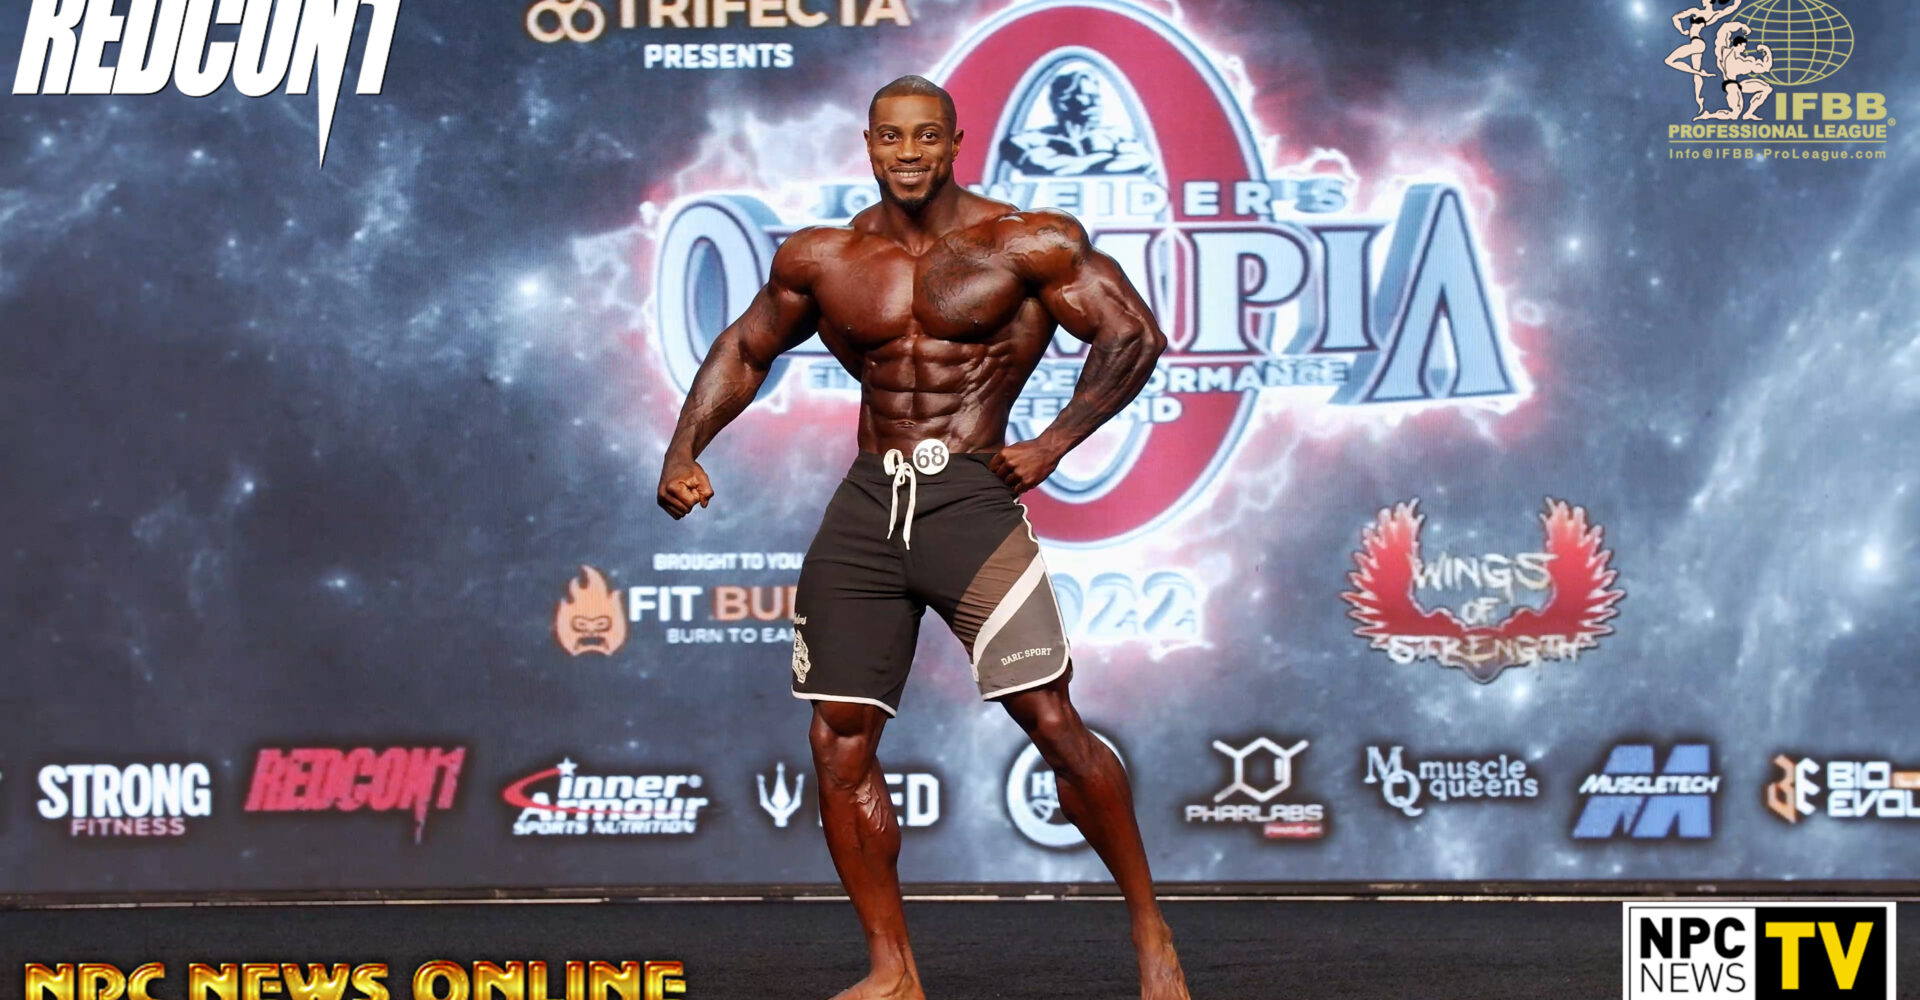 3Time IFBB Pro League Men’s Physique Olympia Champion & 2022 2nd Place